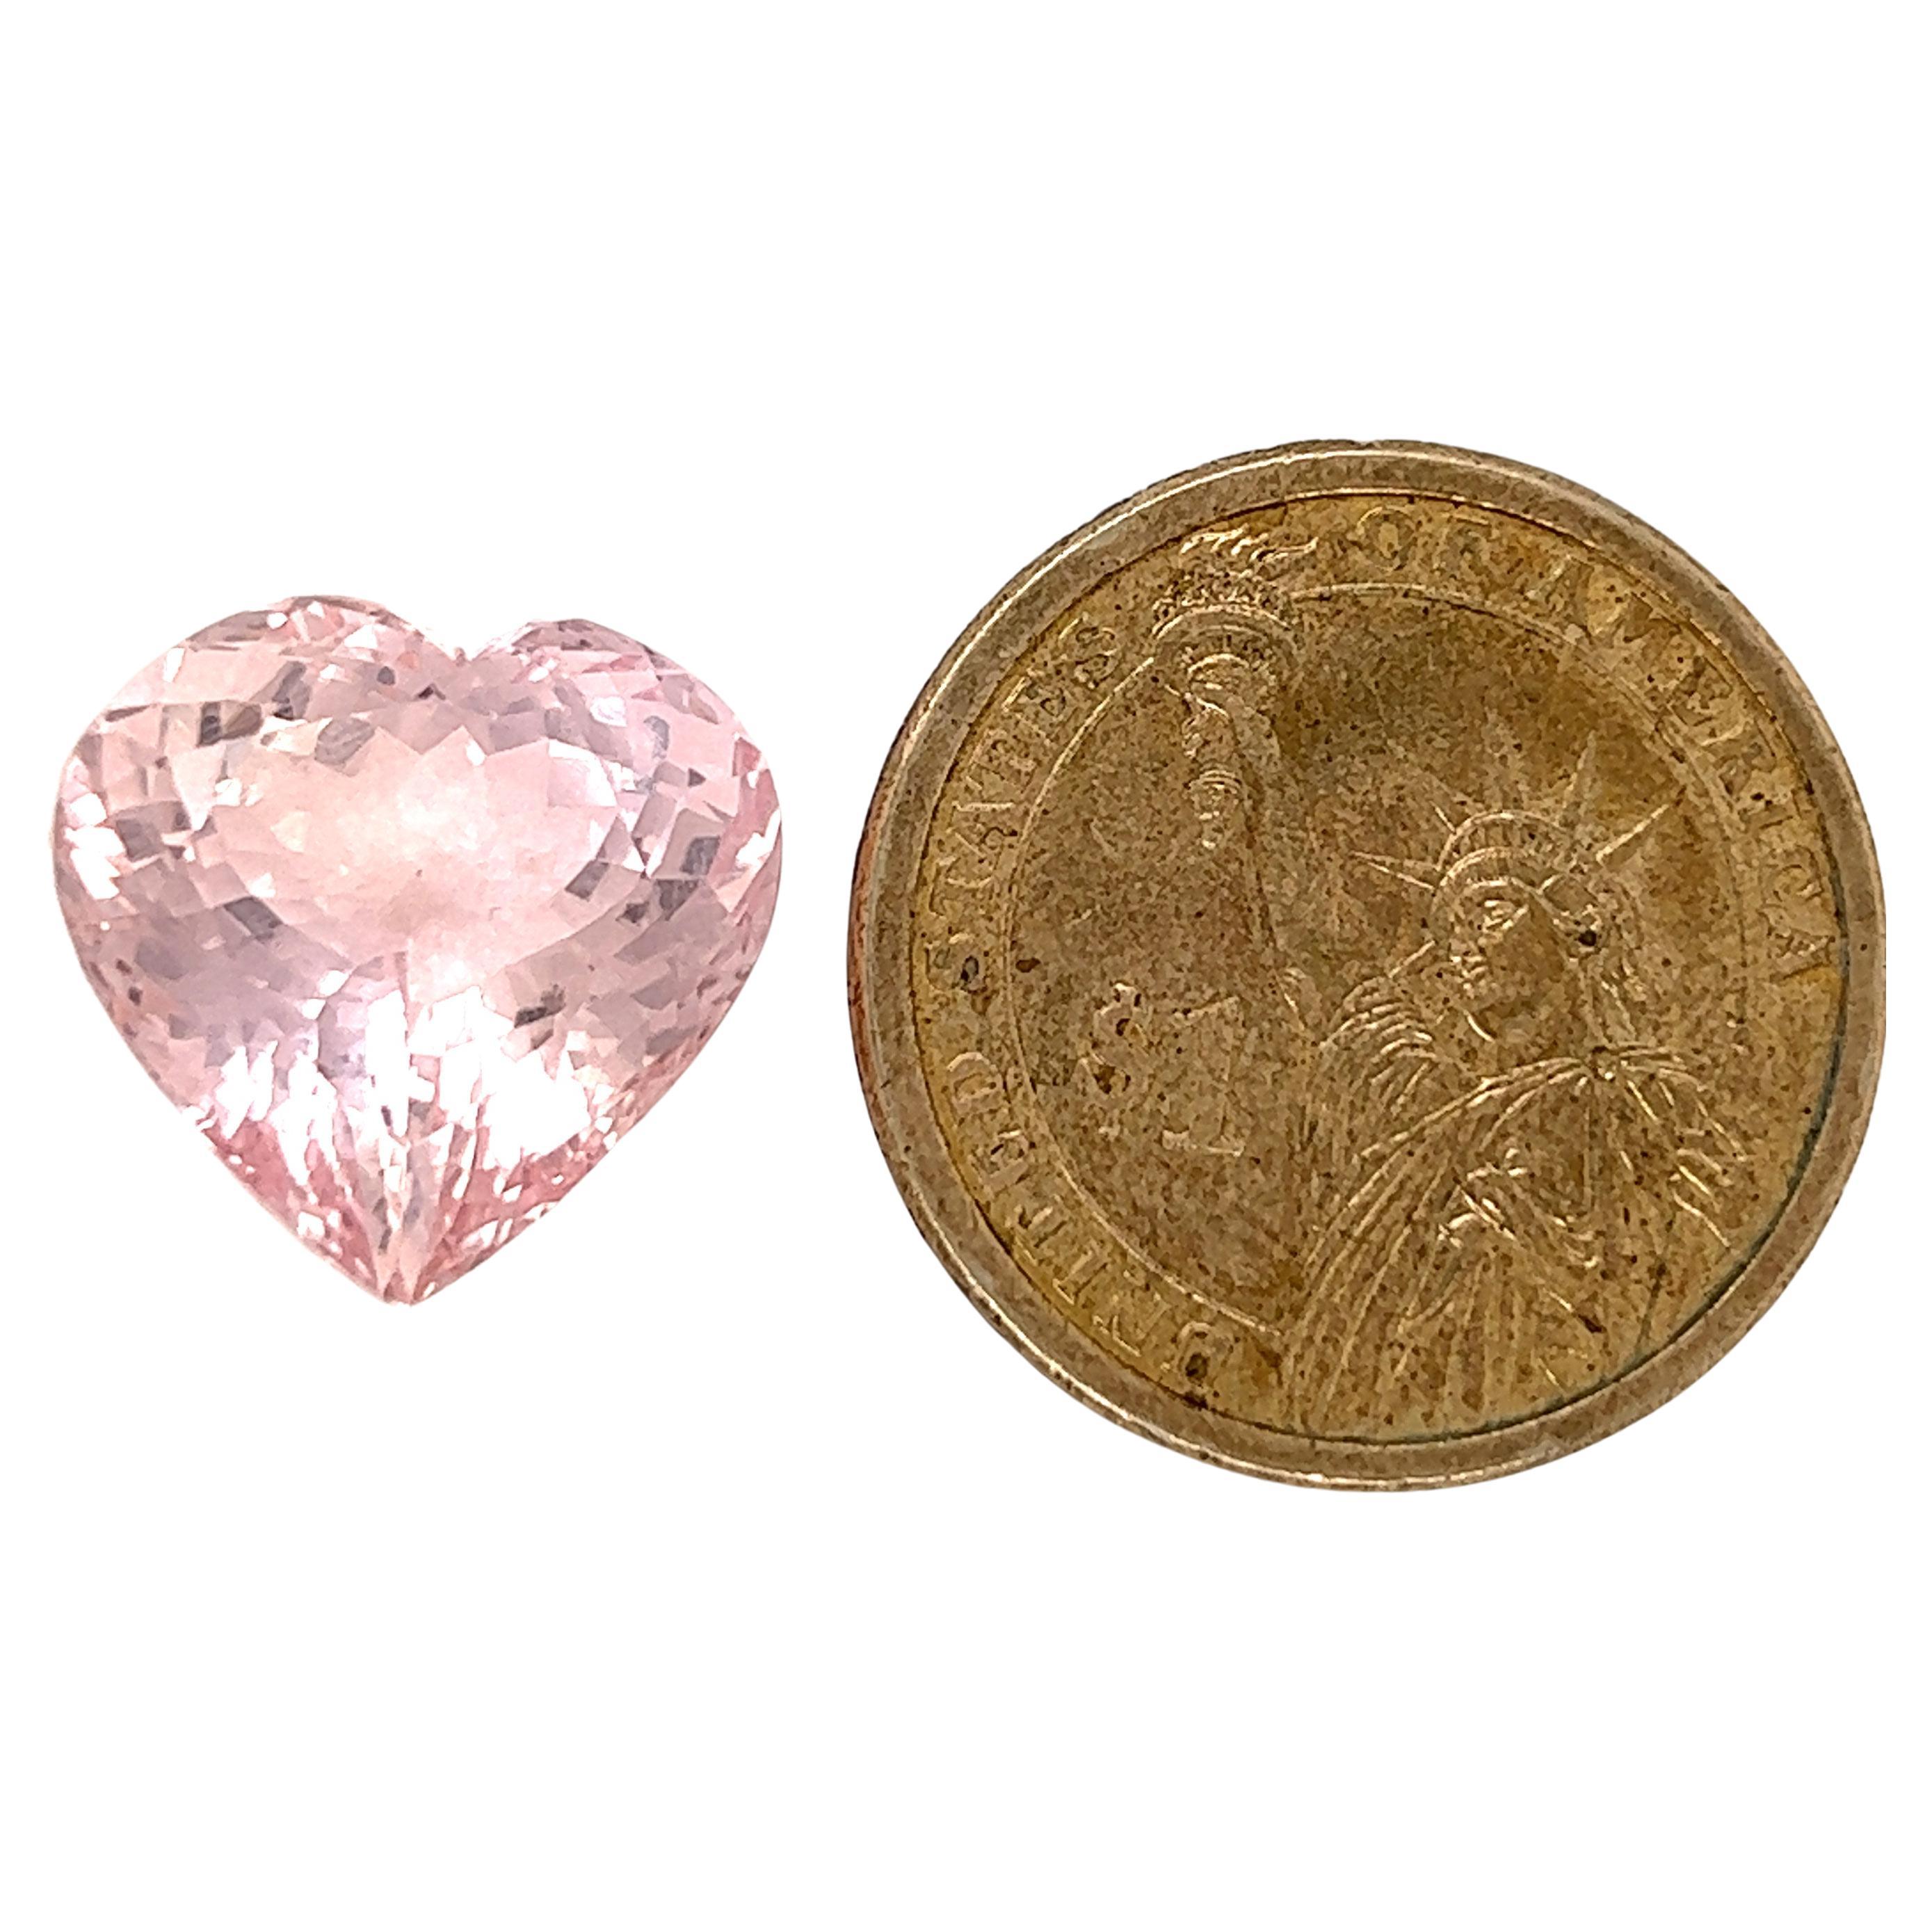 SKU - 50015
Stone : Natural pink morganite
Shape : Heart
Clarity -  Eye clean
Grade -  AAA
Weight - 19.24  Cts
Length * Width * Height - 17.5*17.8*11.6
Price - $ 6900

Morganite is a gemstone that brings the prism of love in all its incarnations.